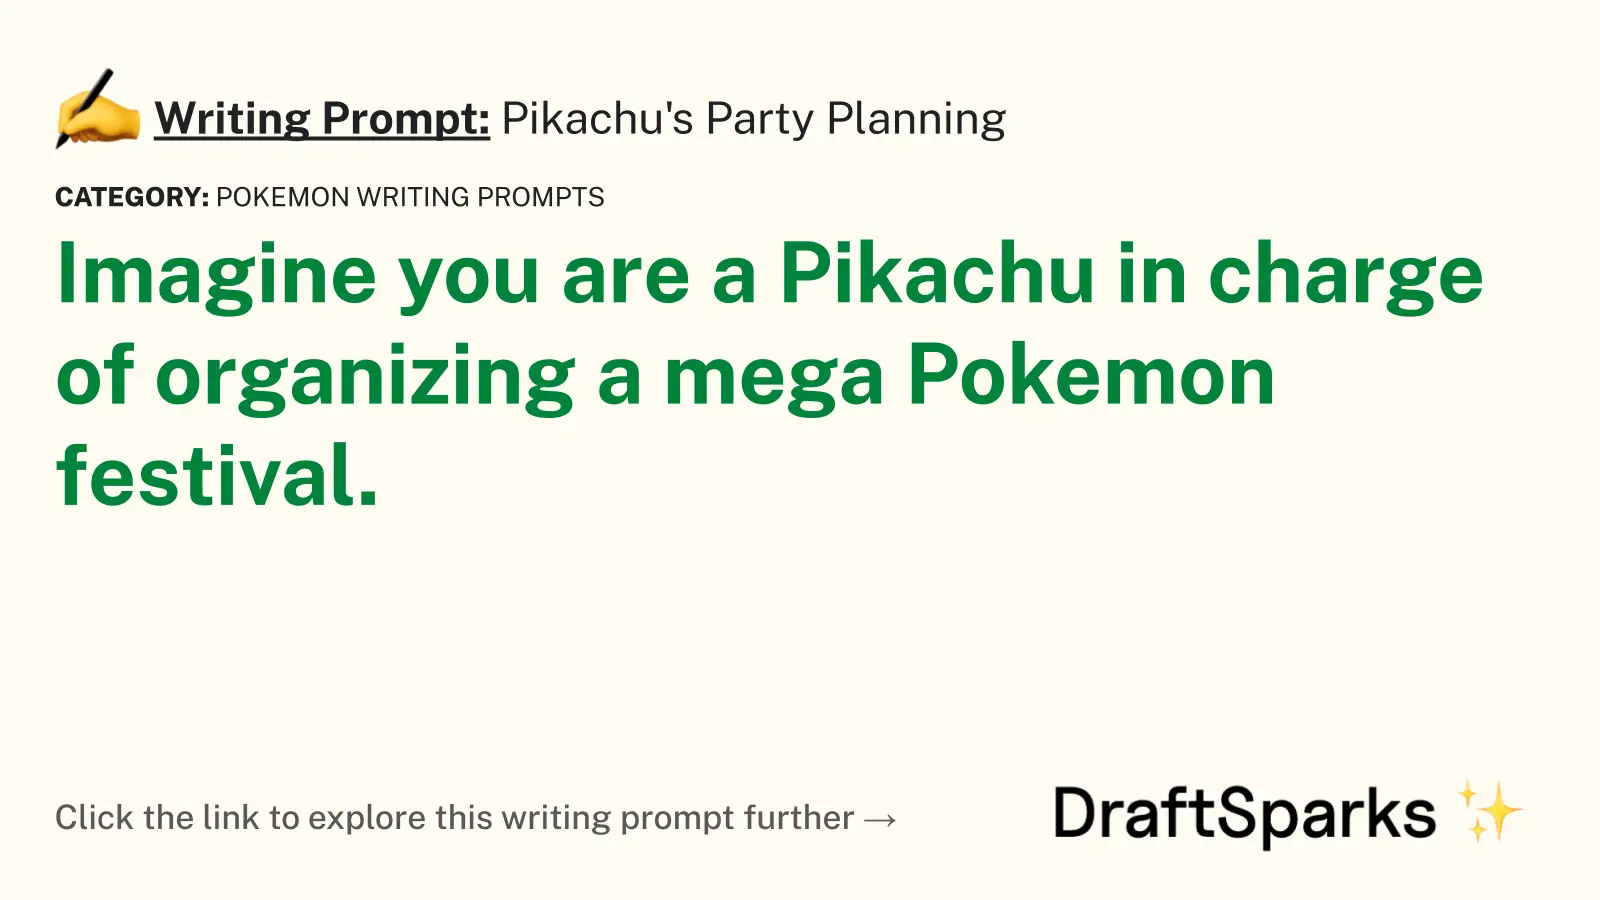 Pikachu’s Party Planning